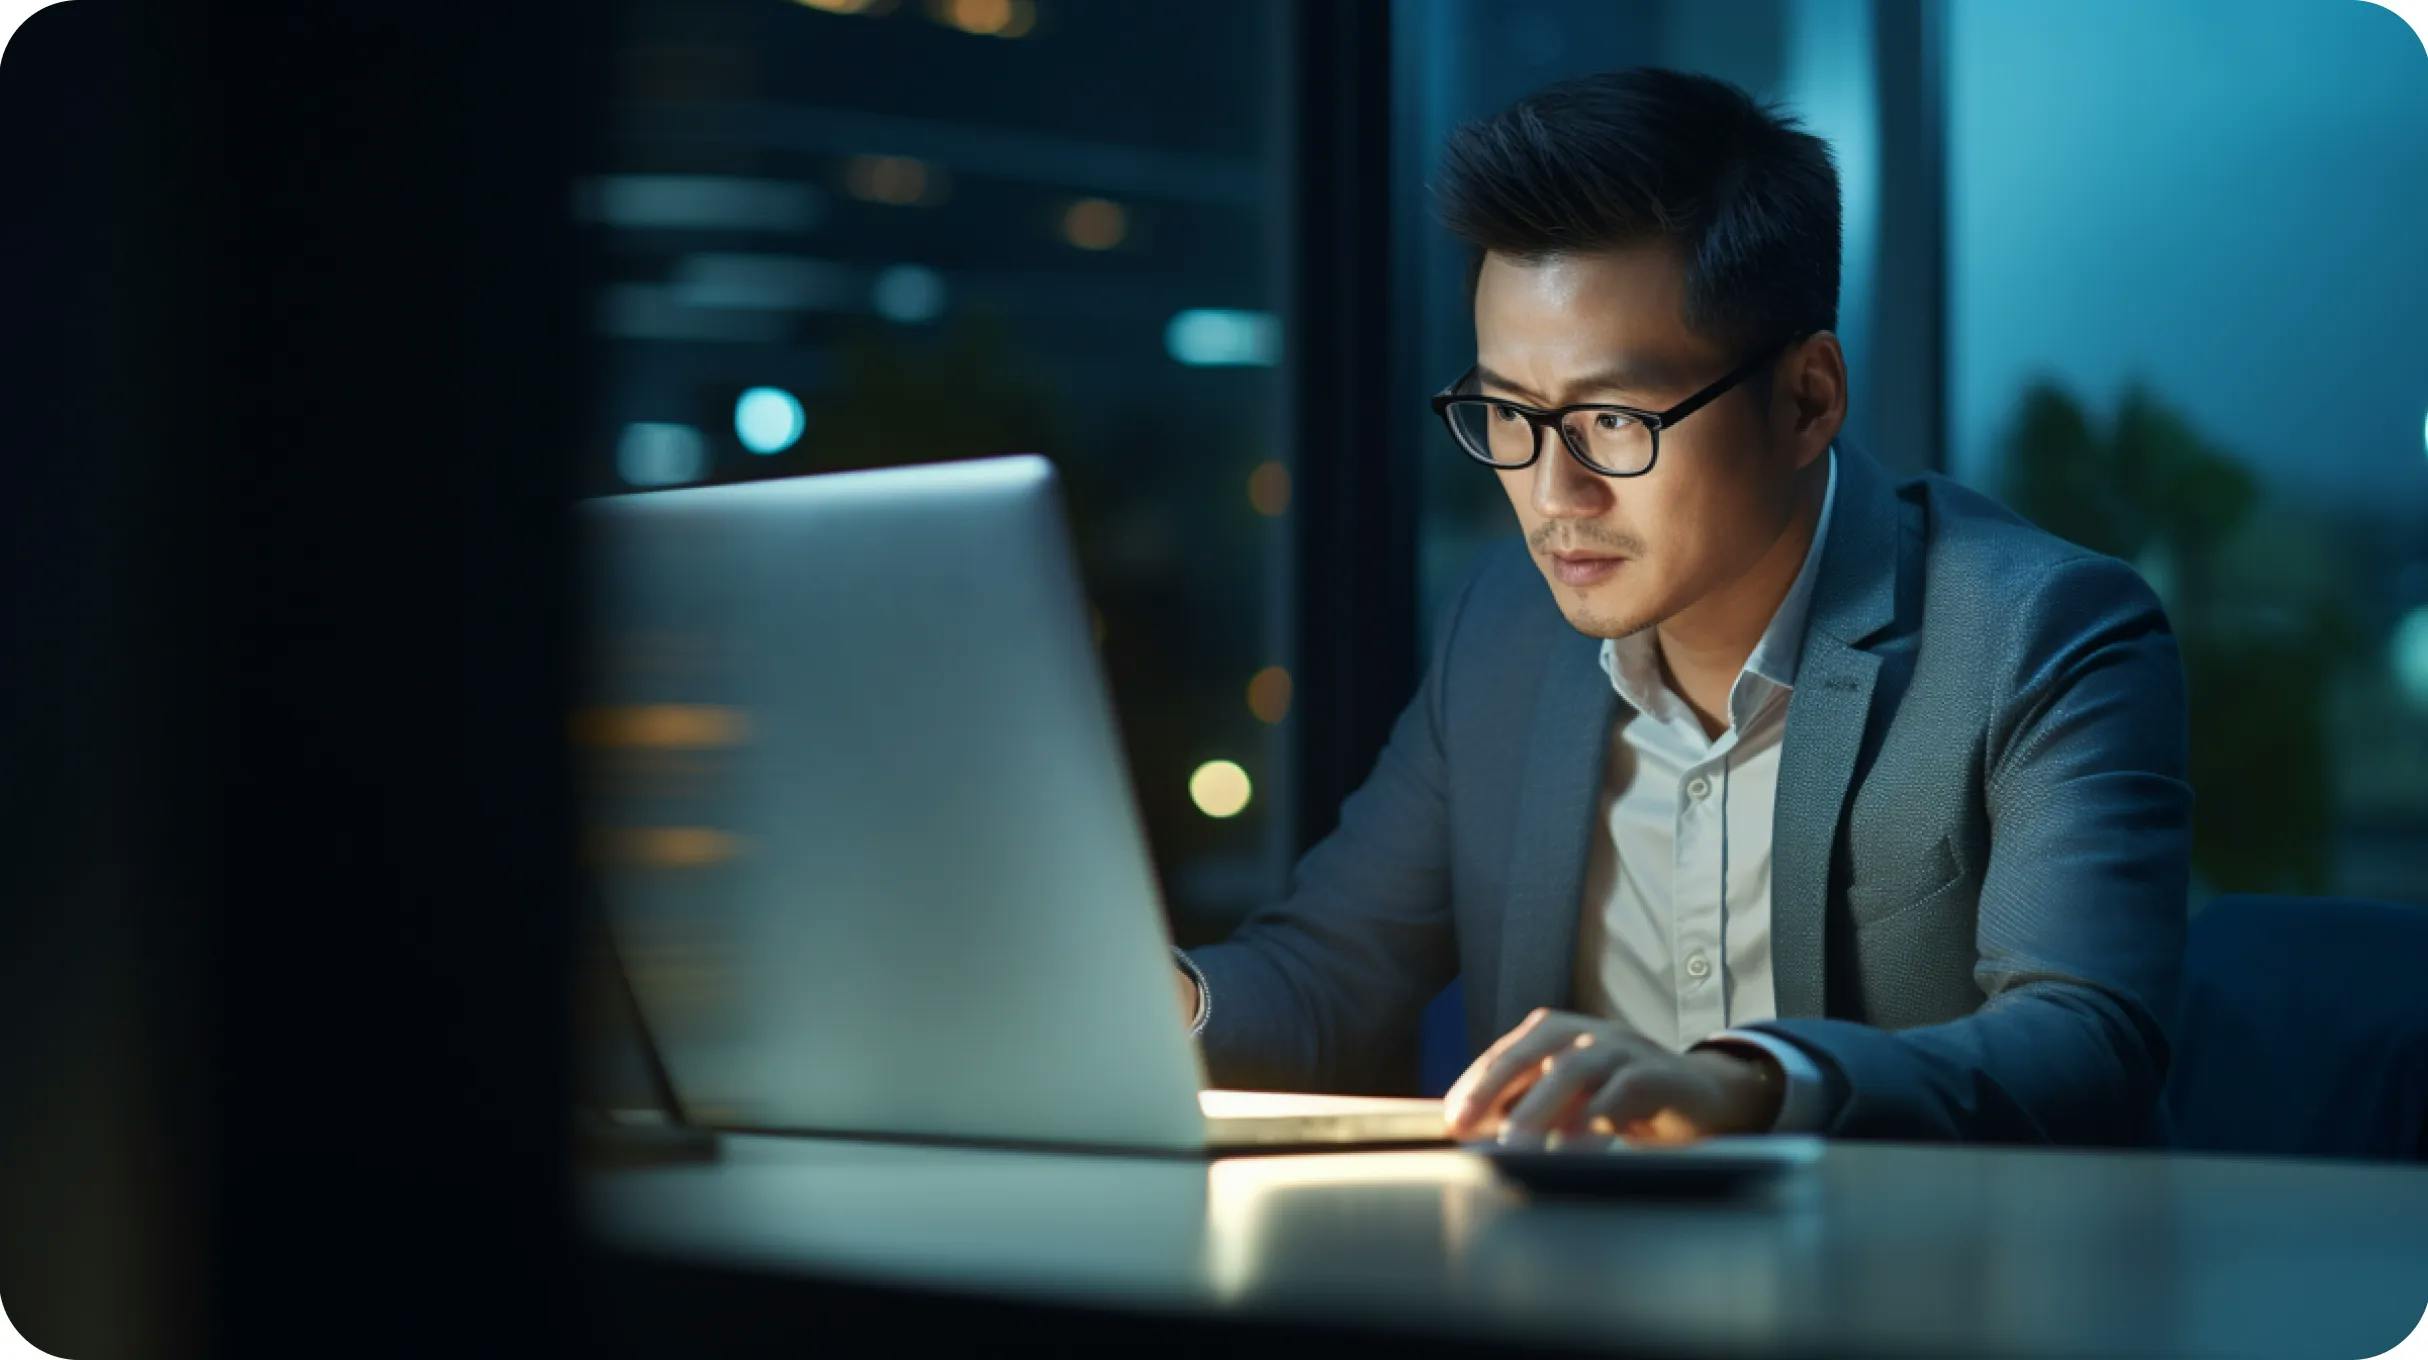 Asian man working at night in an office on a laptop